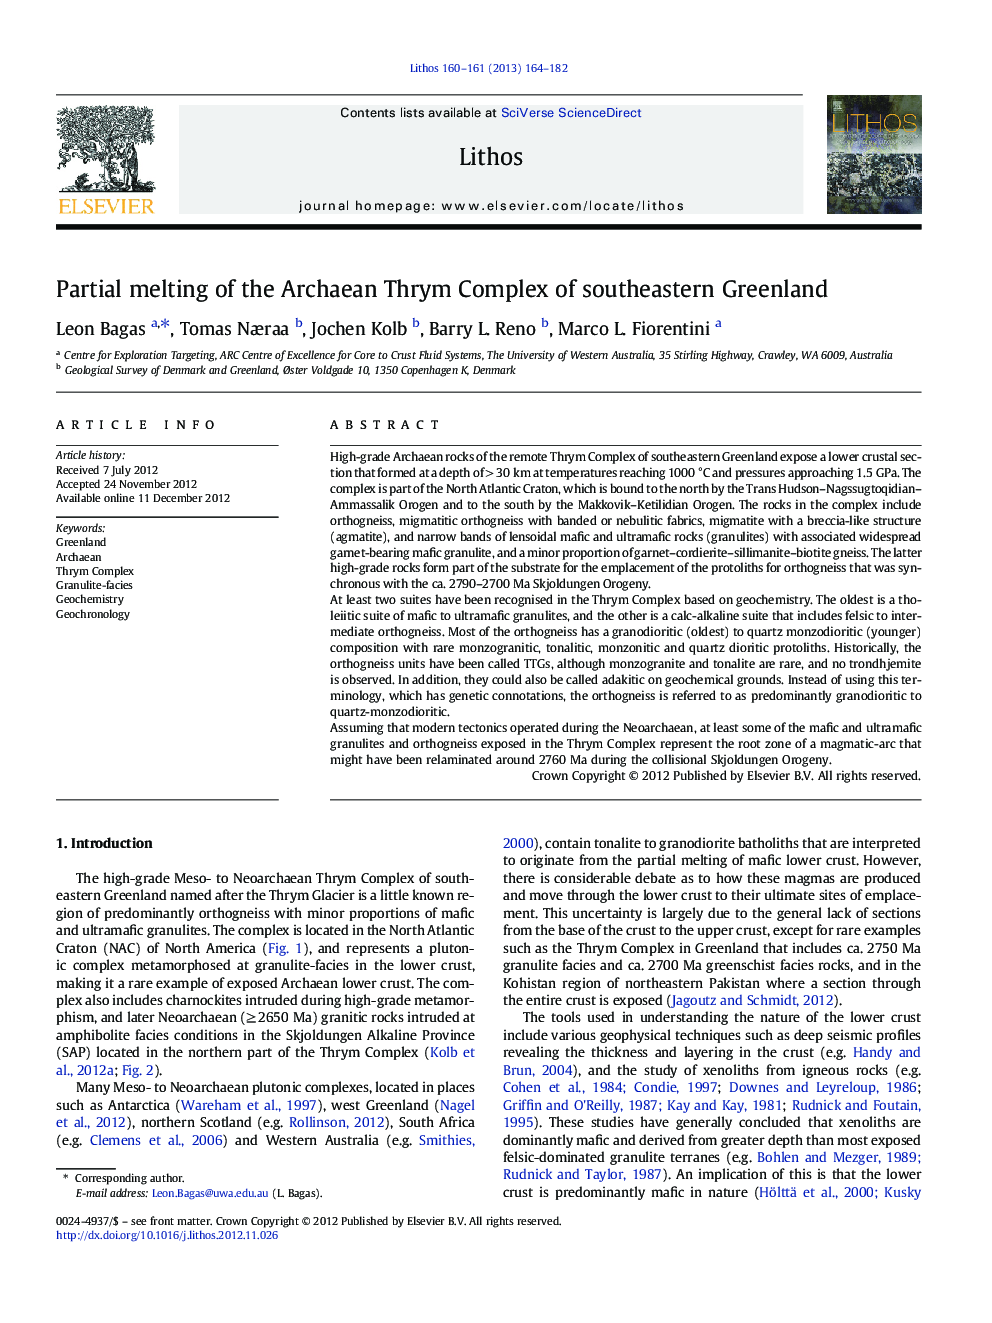 Partial melting of the Archaean Thrym Complex of southeastern Greenland